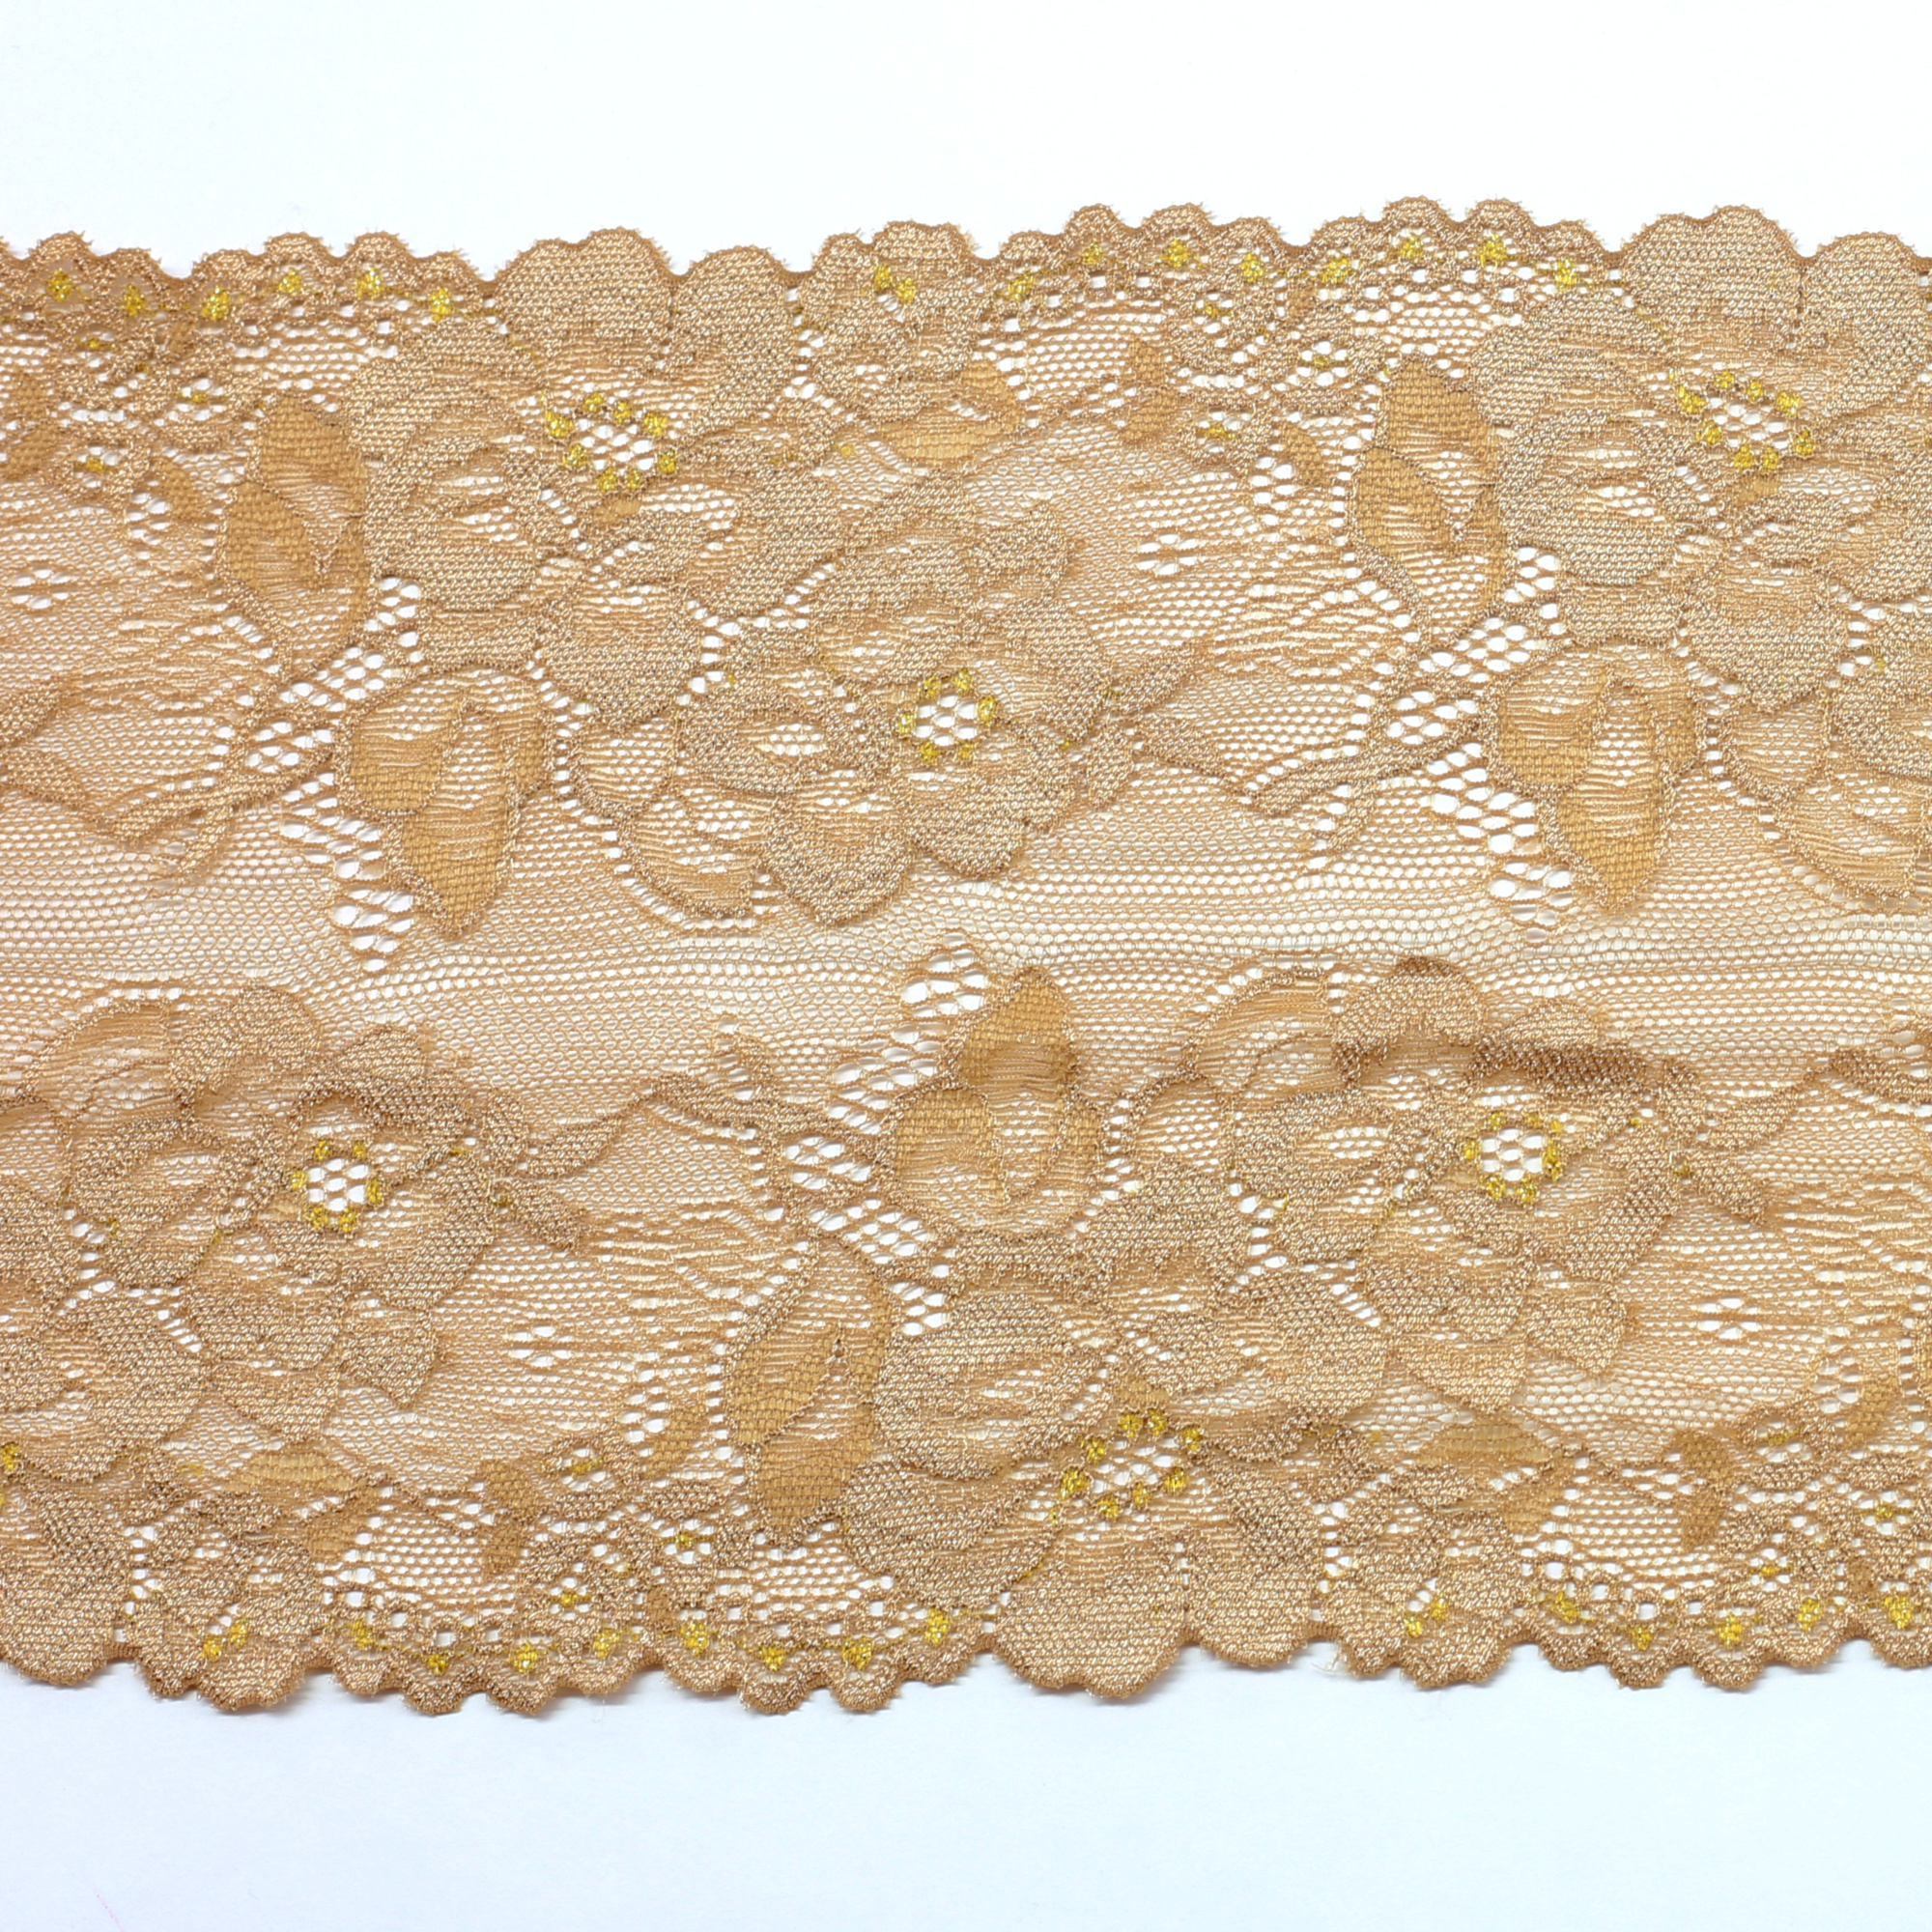 6 1/4 Wide Lace Band Gold Geo Stretch Lace, Galloon Double Edge Lace Band,  Gold Cross-dyed With Mocha 